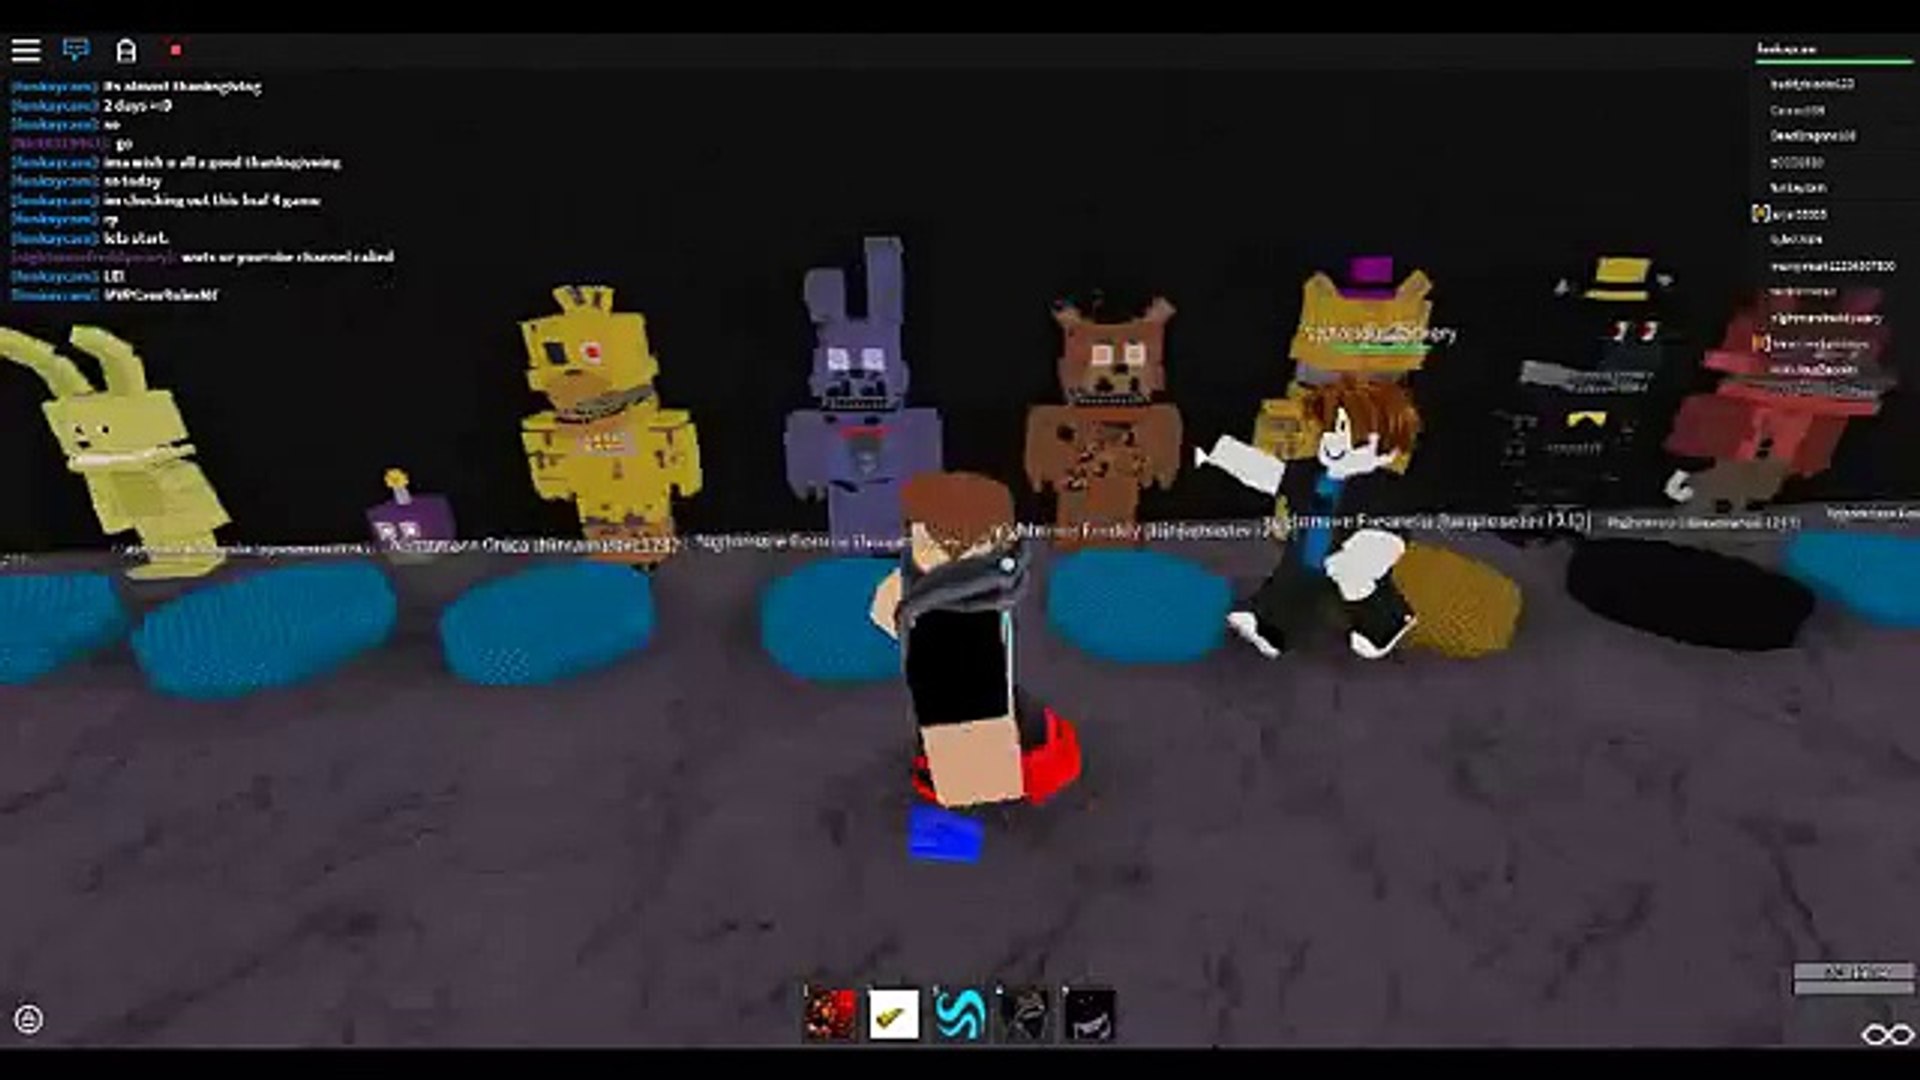 Roblox Checking Out This Weird Game Fnaf Rp Thanks Giveing Celebration - best fnaf rp game on roblox